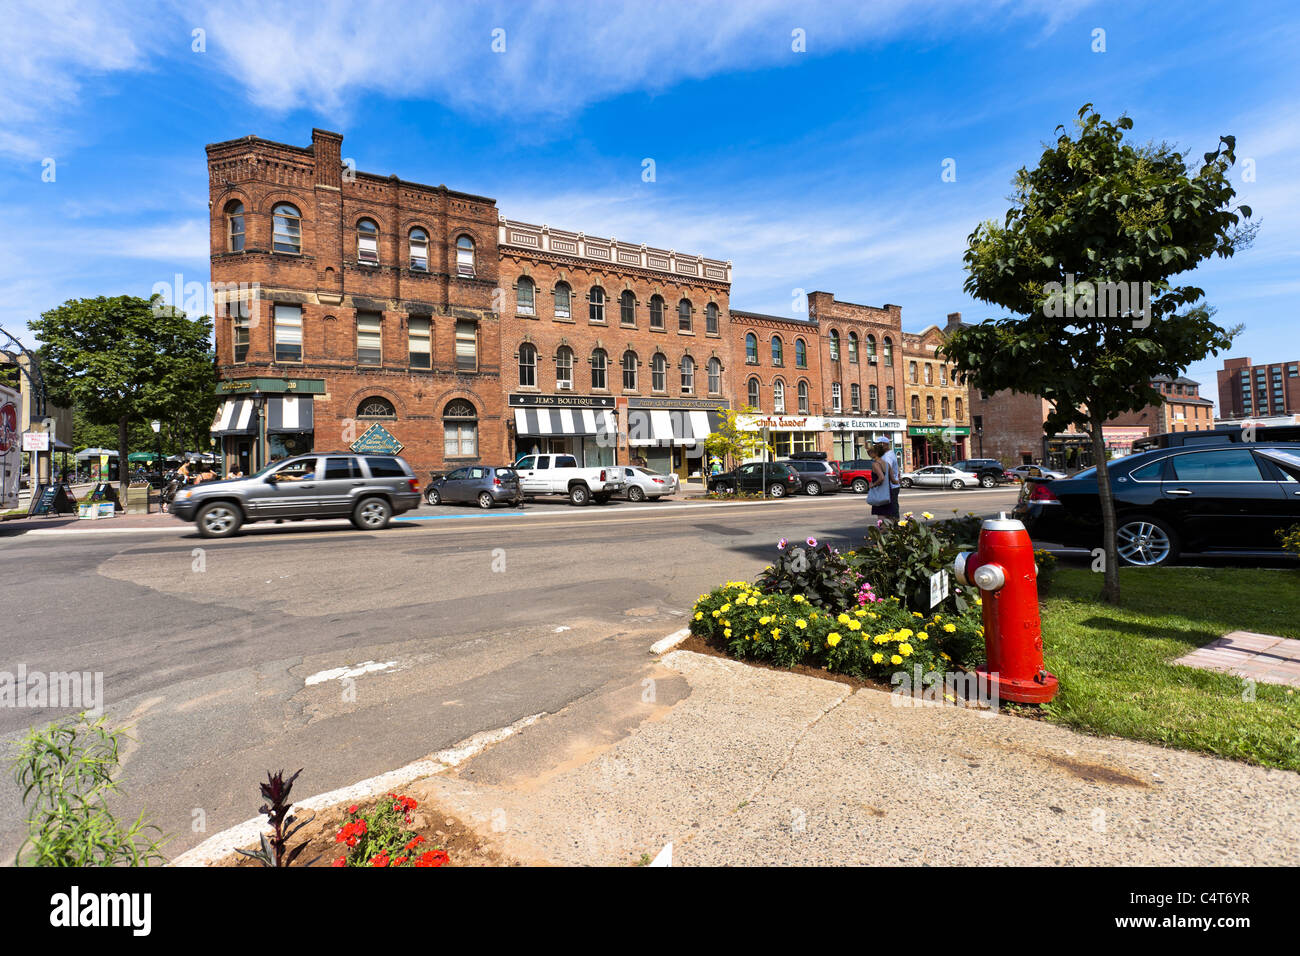 Queen Street in the central business district of Charlottetown, Prince Edward Island, Canada Stock Photo